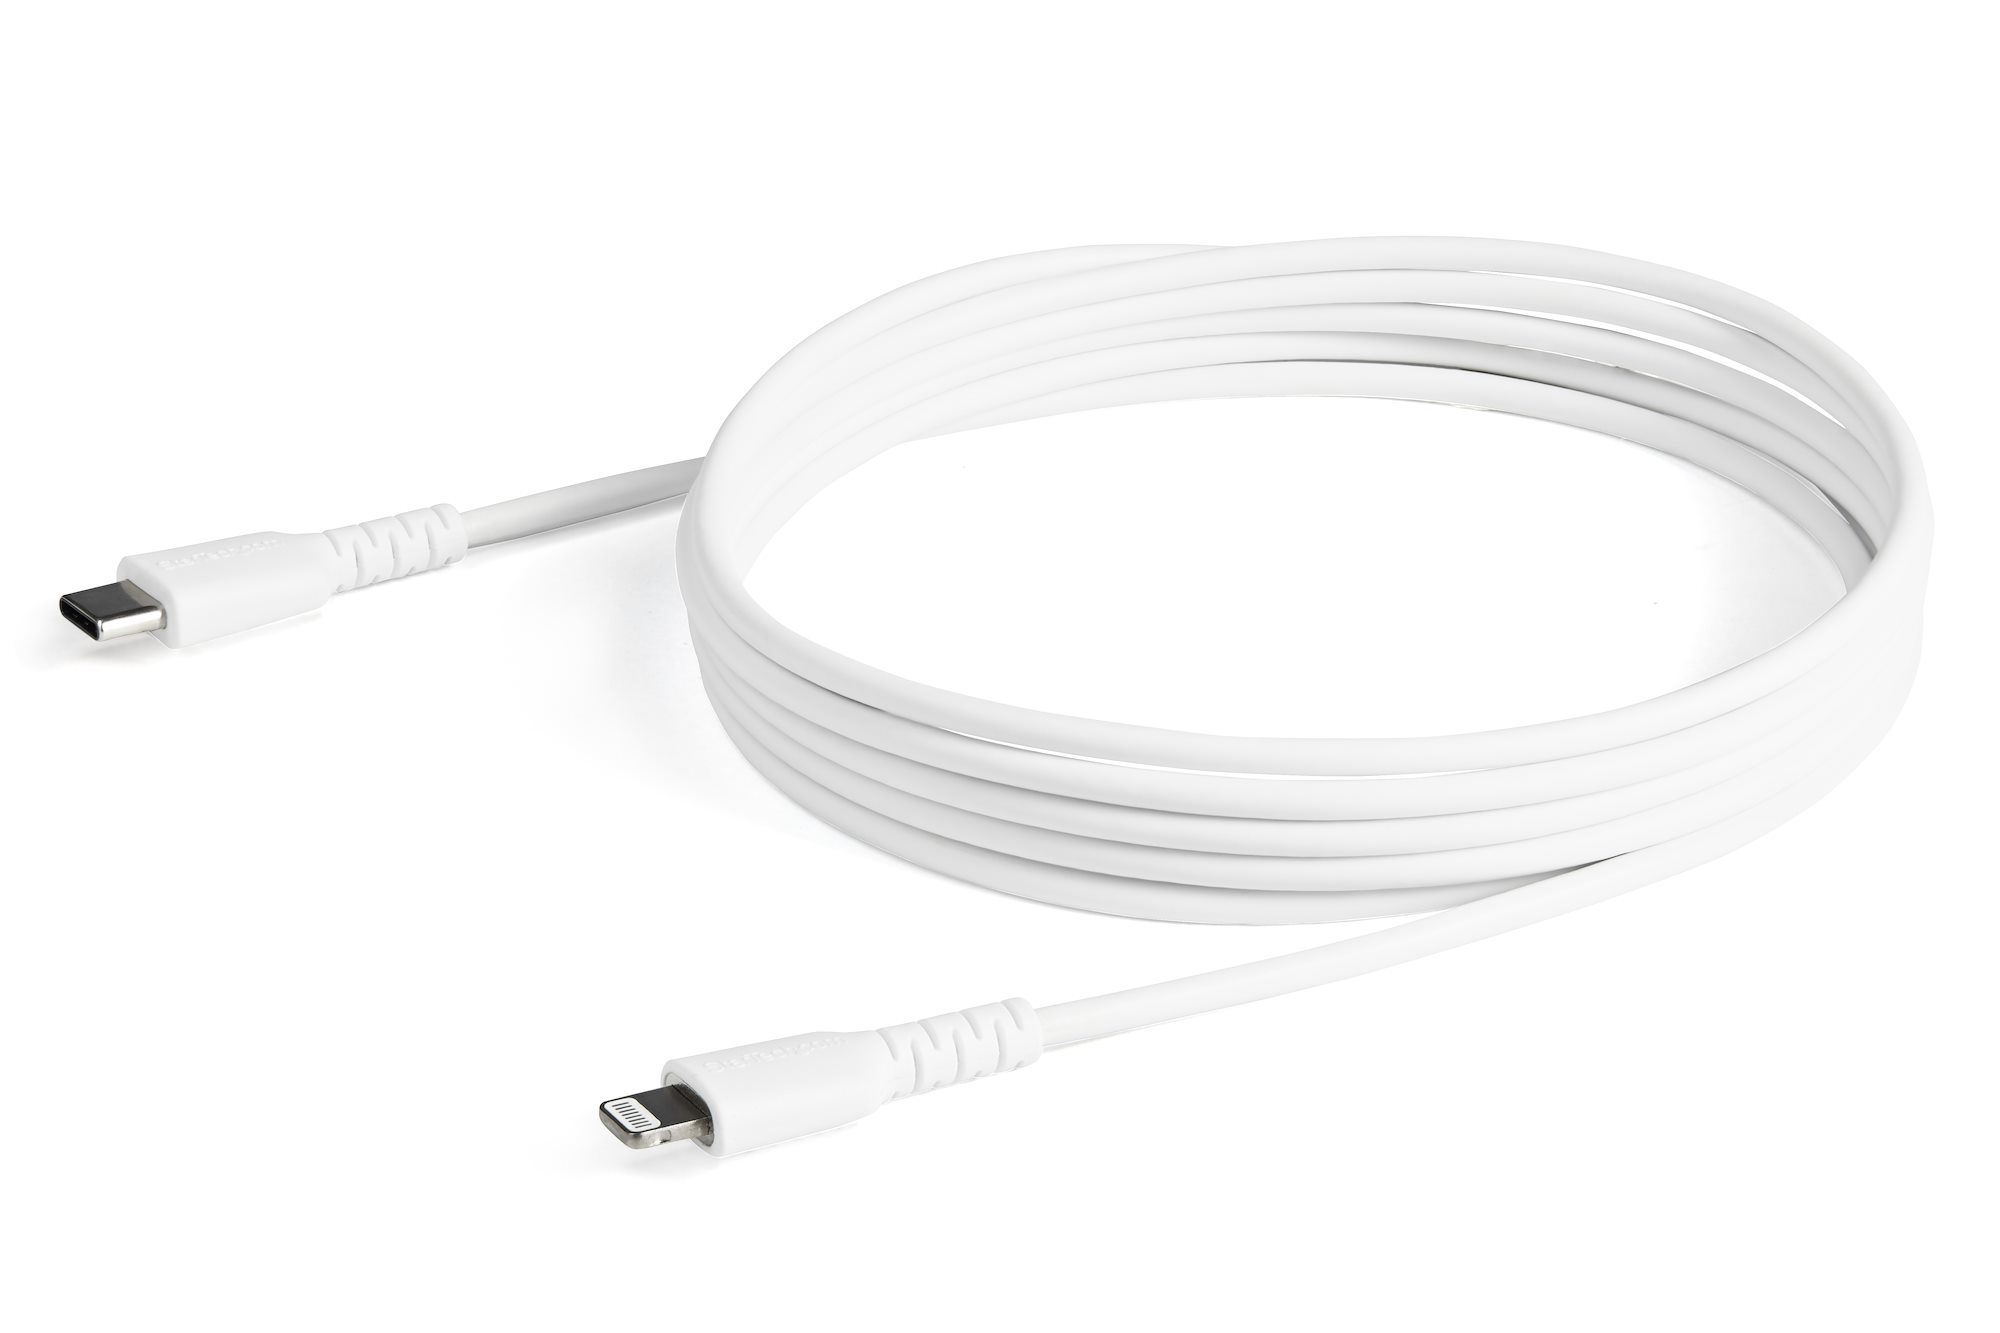 StarTech.com 6ft (2m) Durable USB-C to Lightning Cable Right-Angled USB  Type-C to Lightning Cord - RUSB2CLTMM2MR - USB Cables 